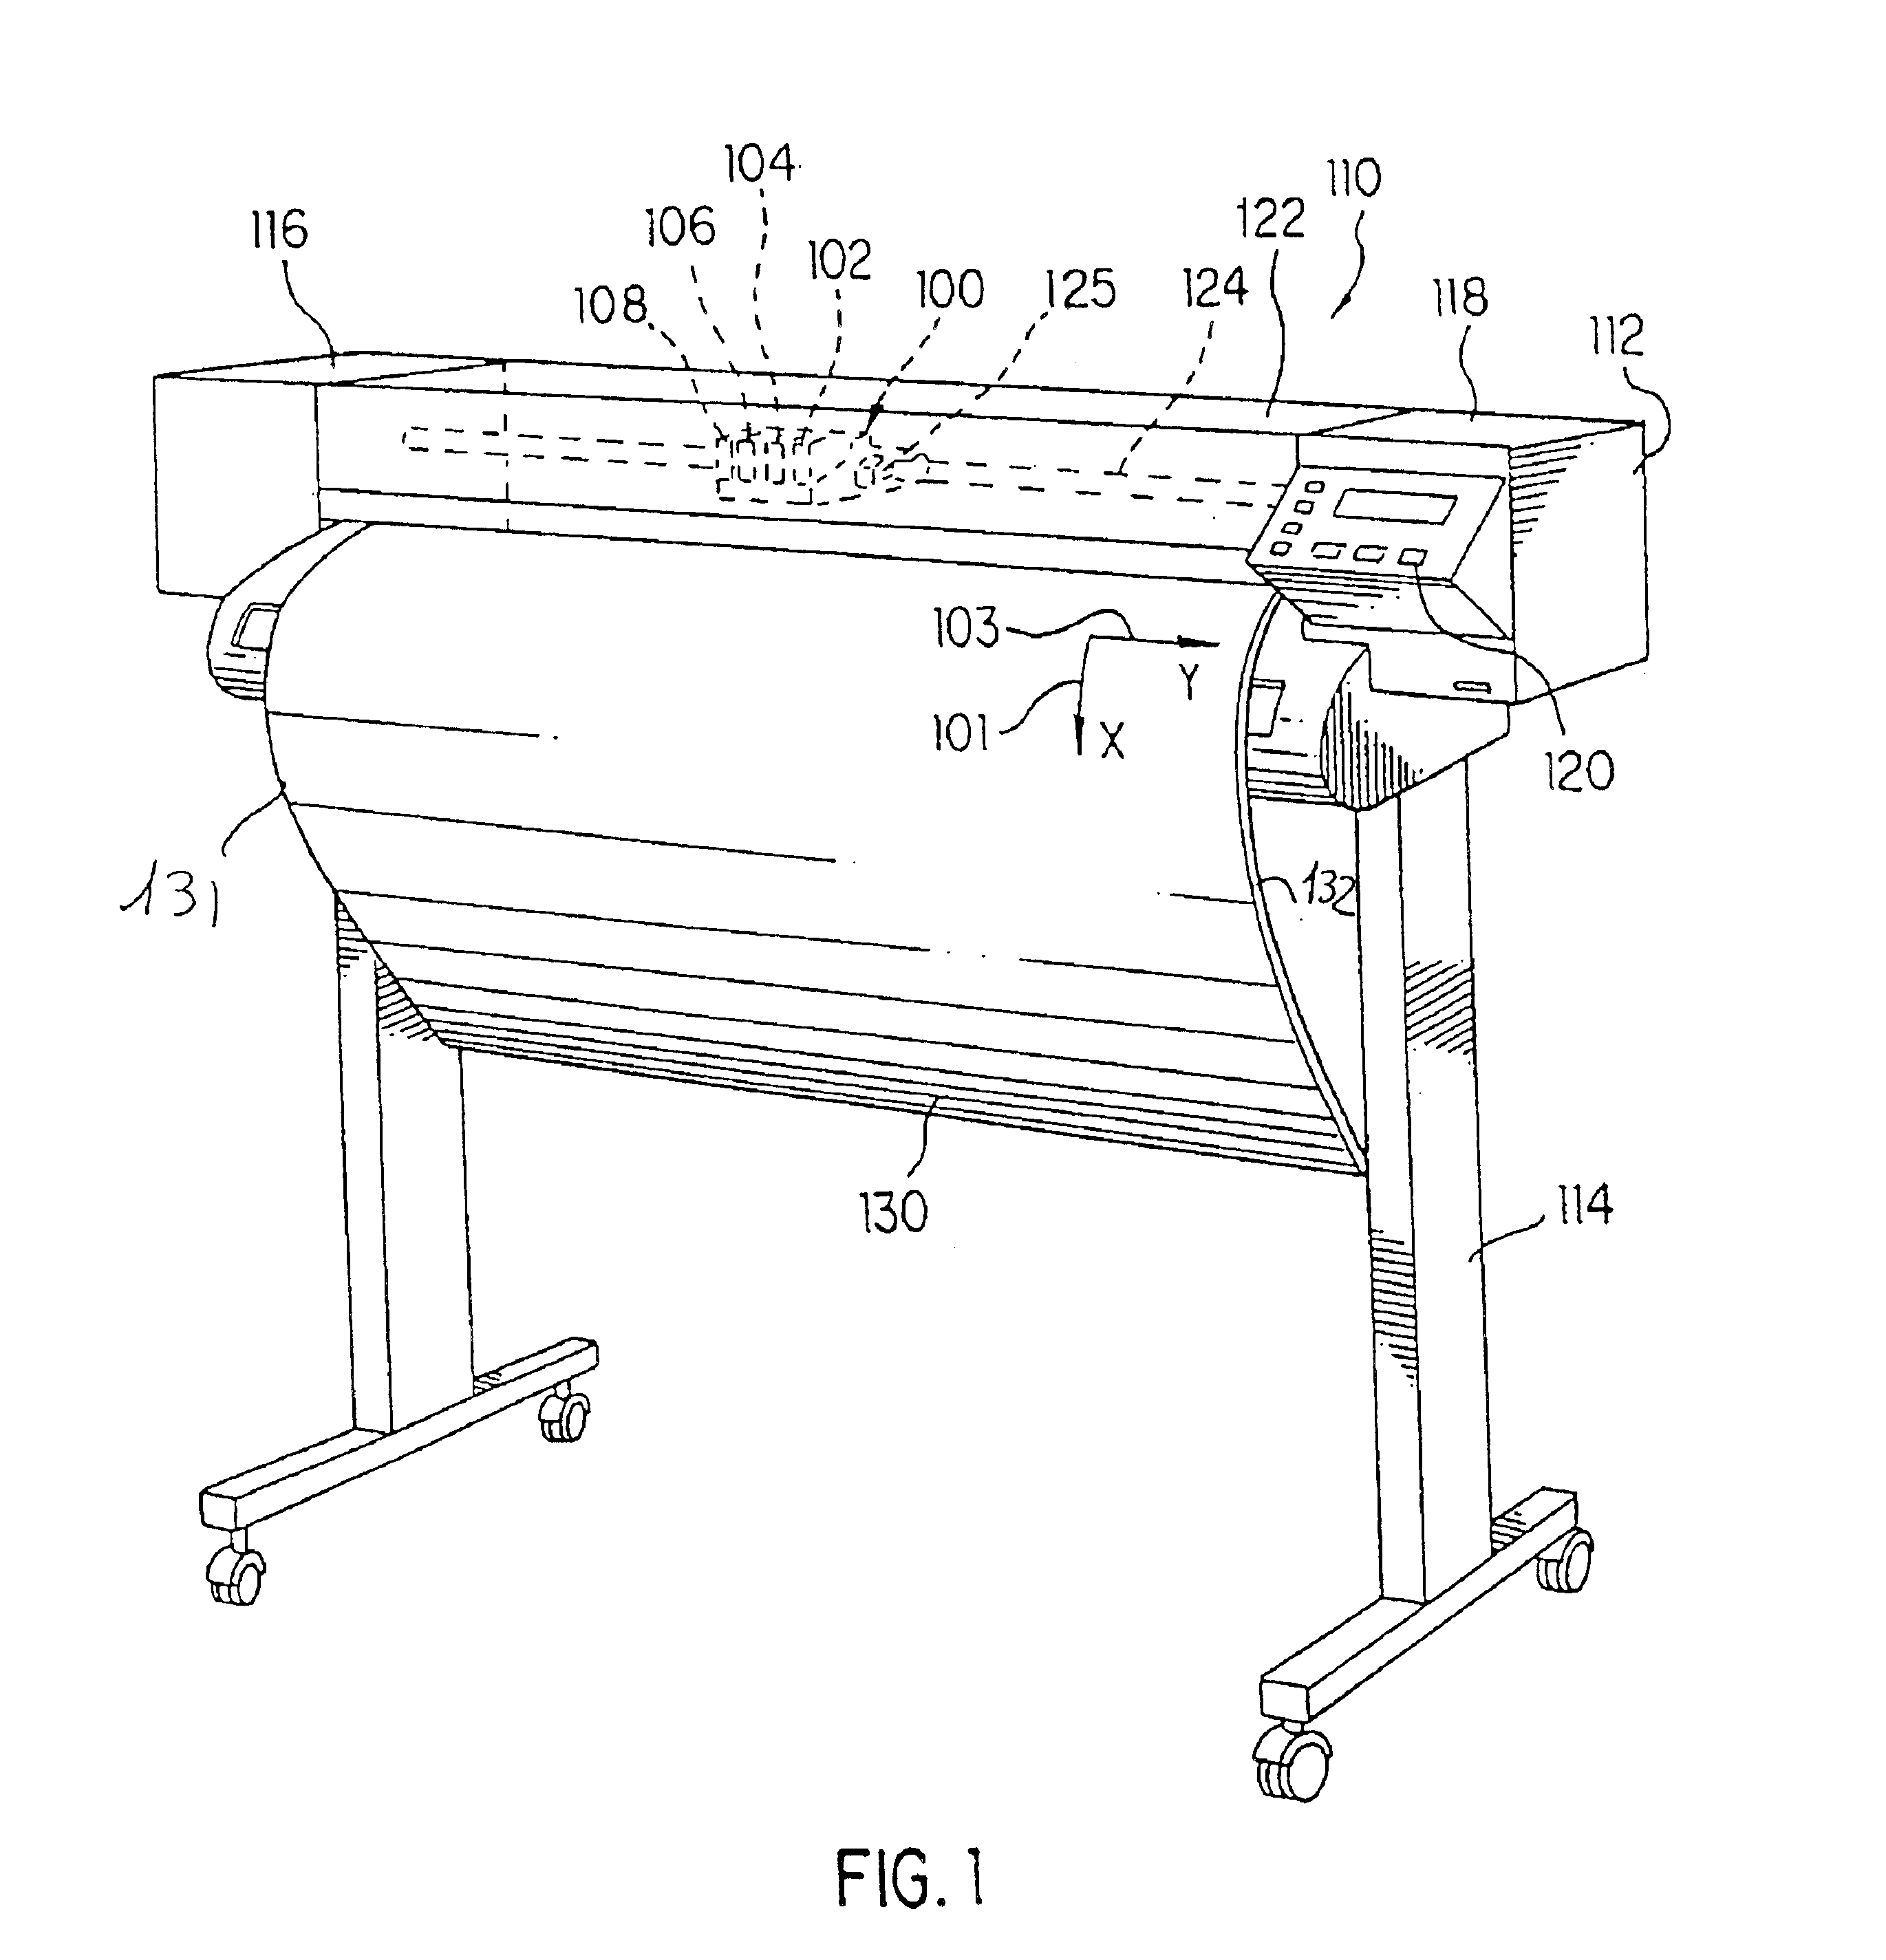 Inkjet apparatus and method for controlling undulation on media